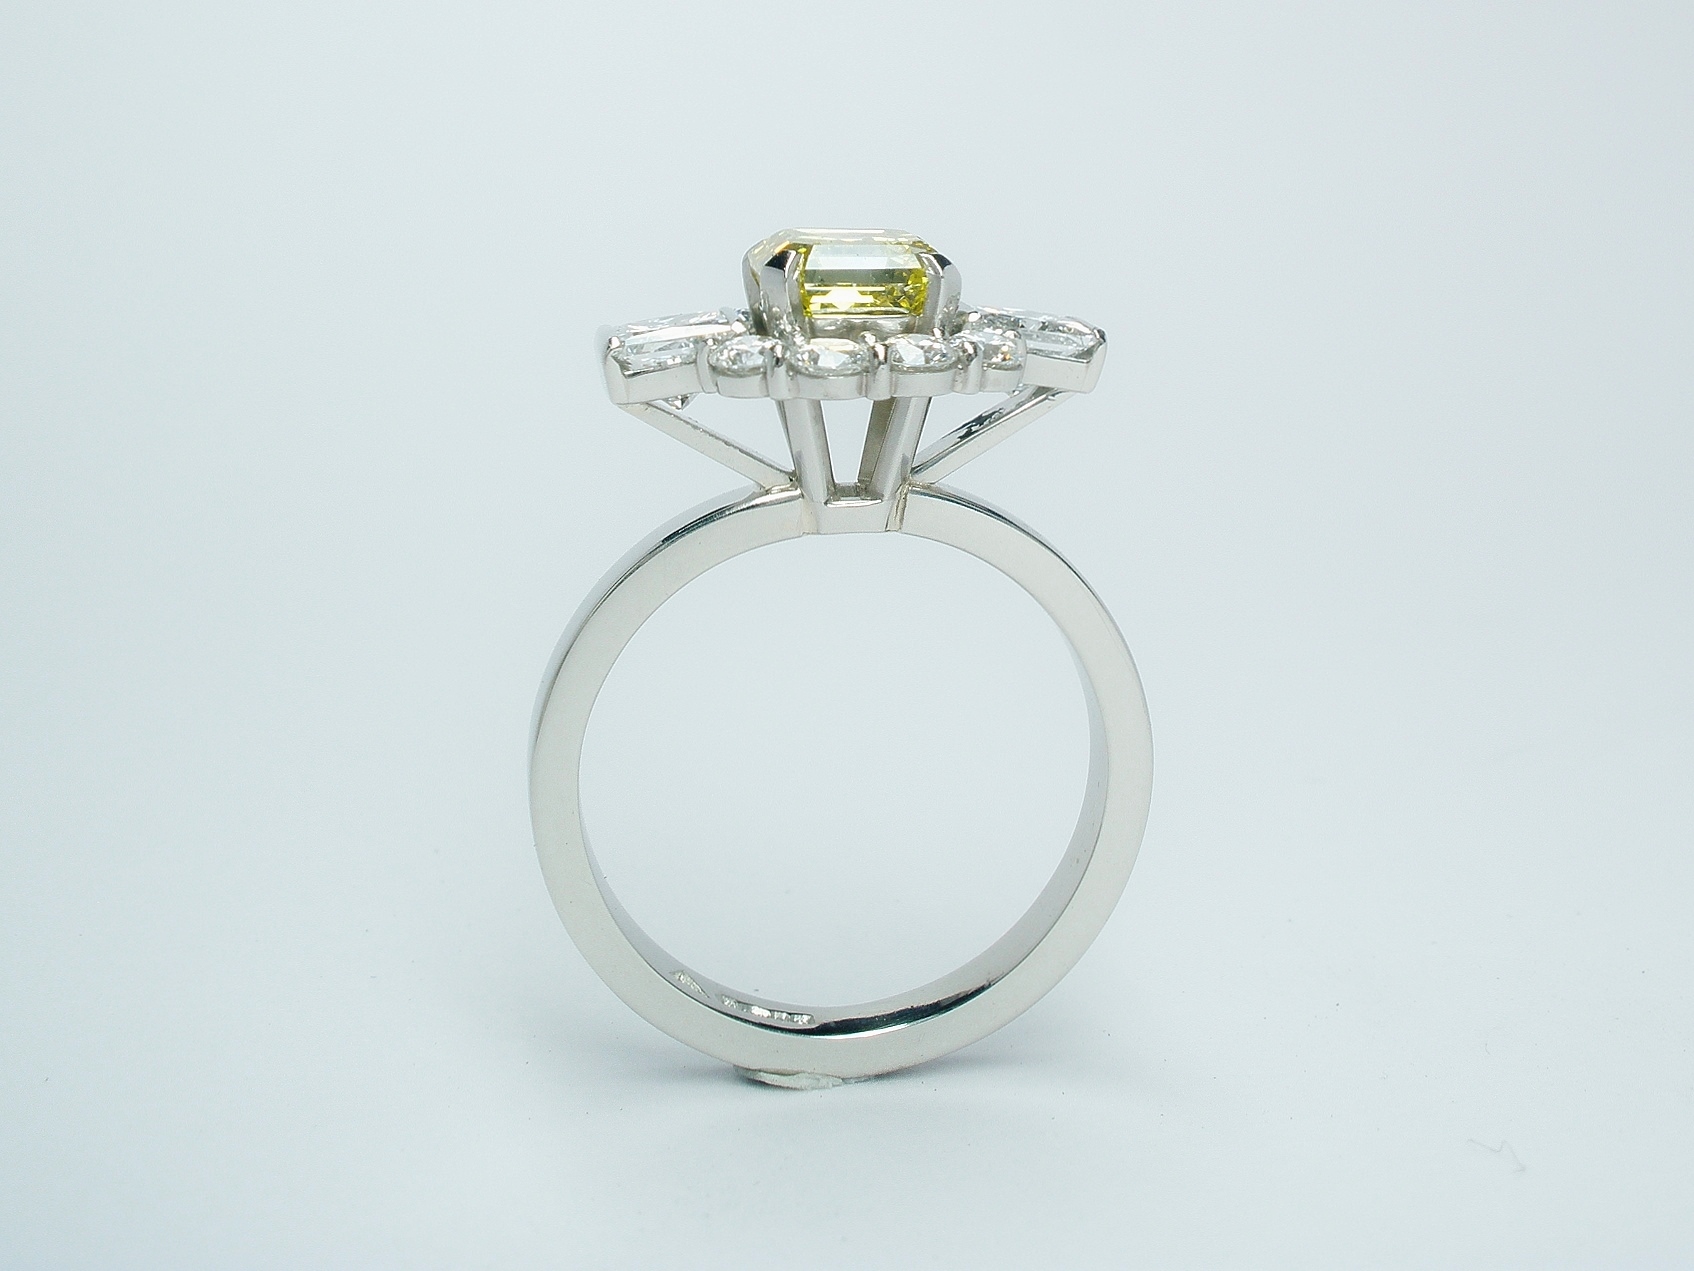 Canary yellow Asscher cut diamond (1.20cts.), white princess cut and round brilliant cut diamond 'Halo' cluster ring mounted in platinum.